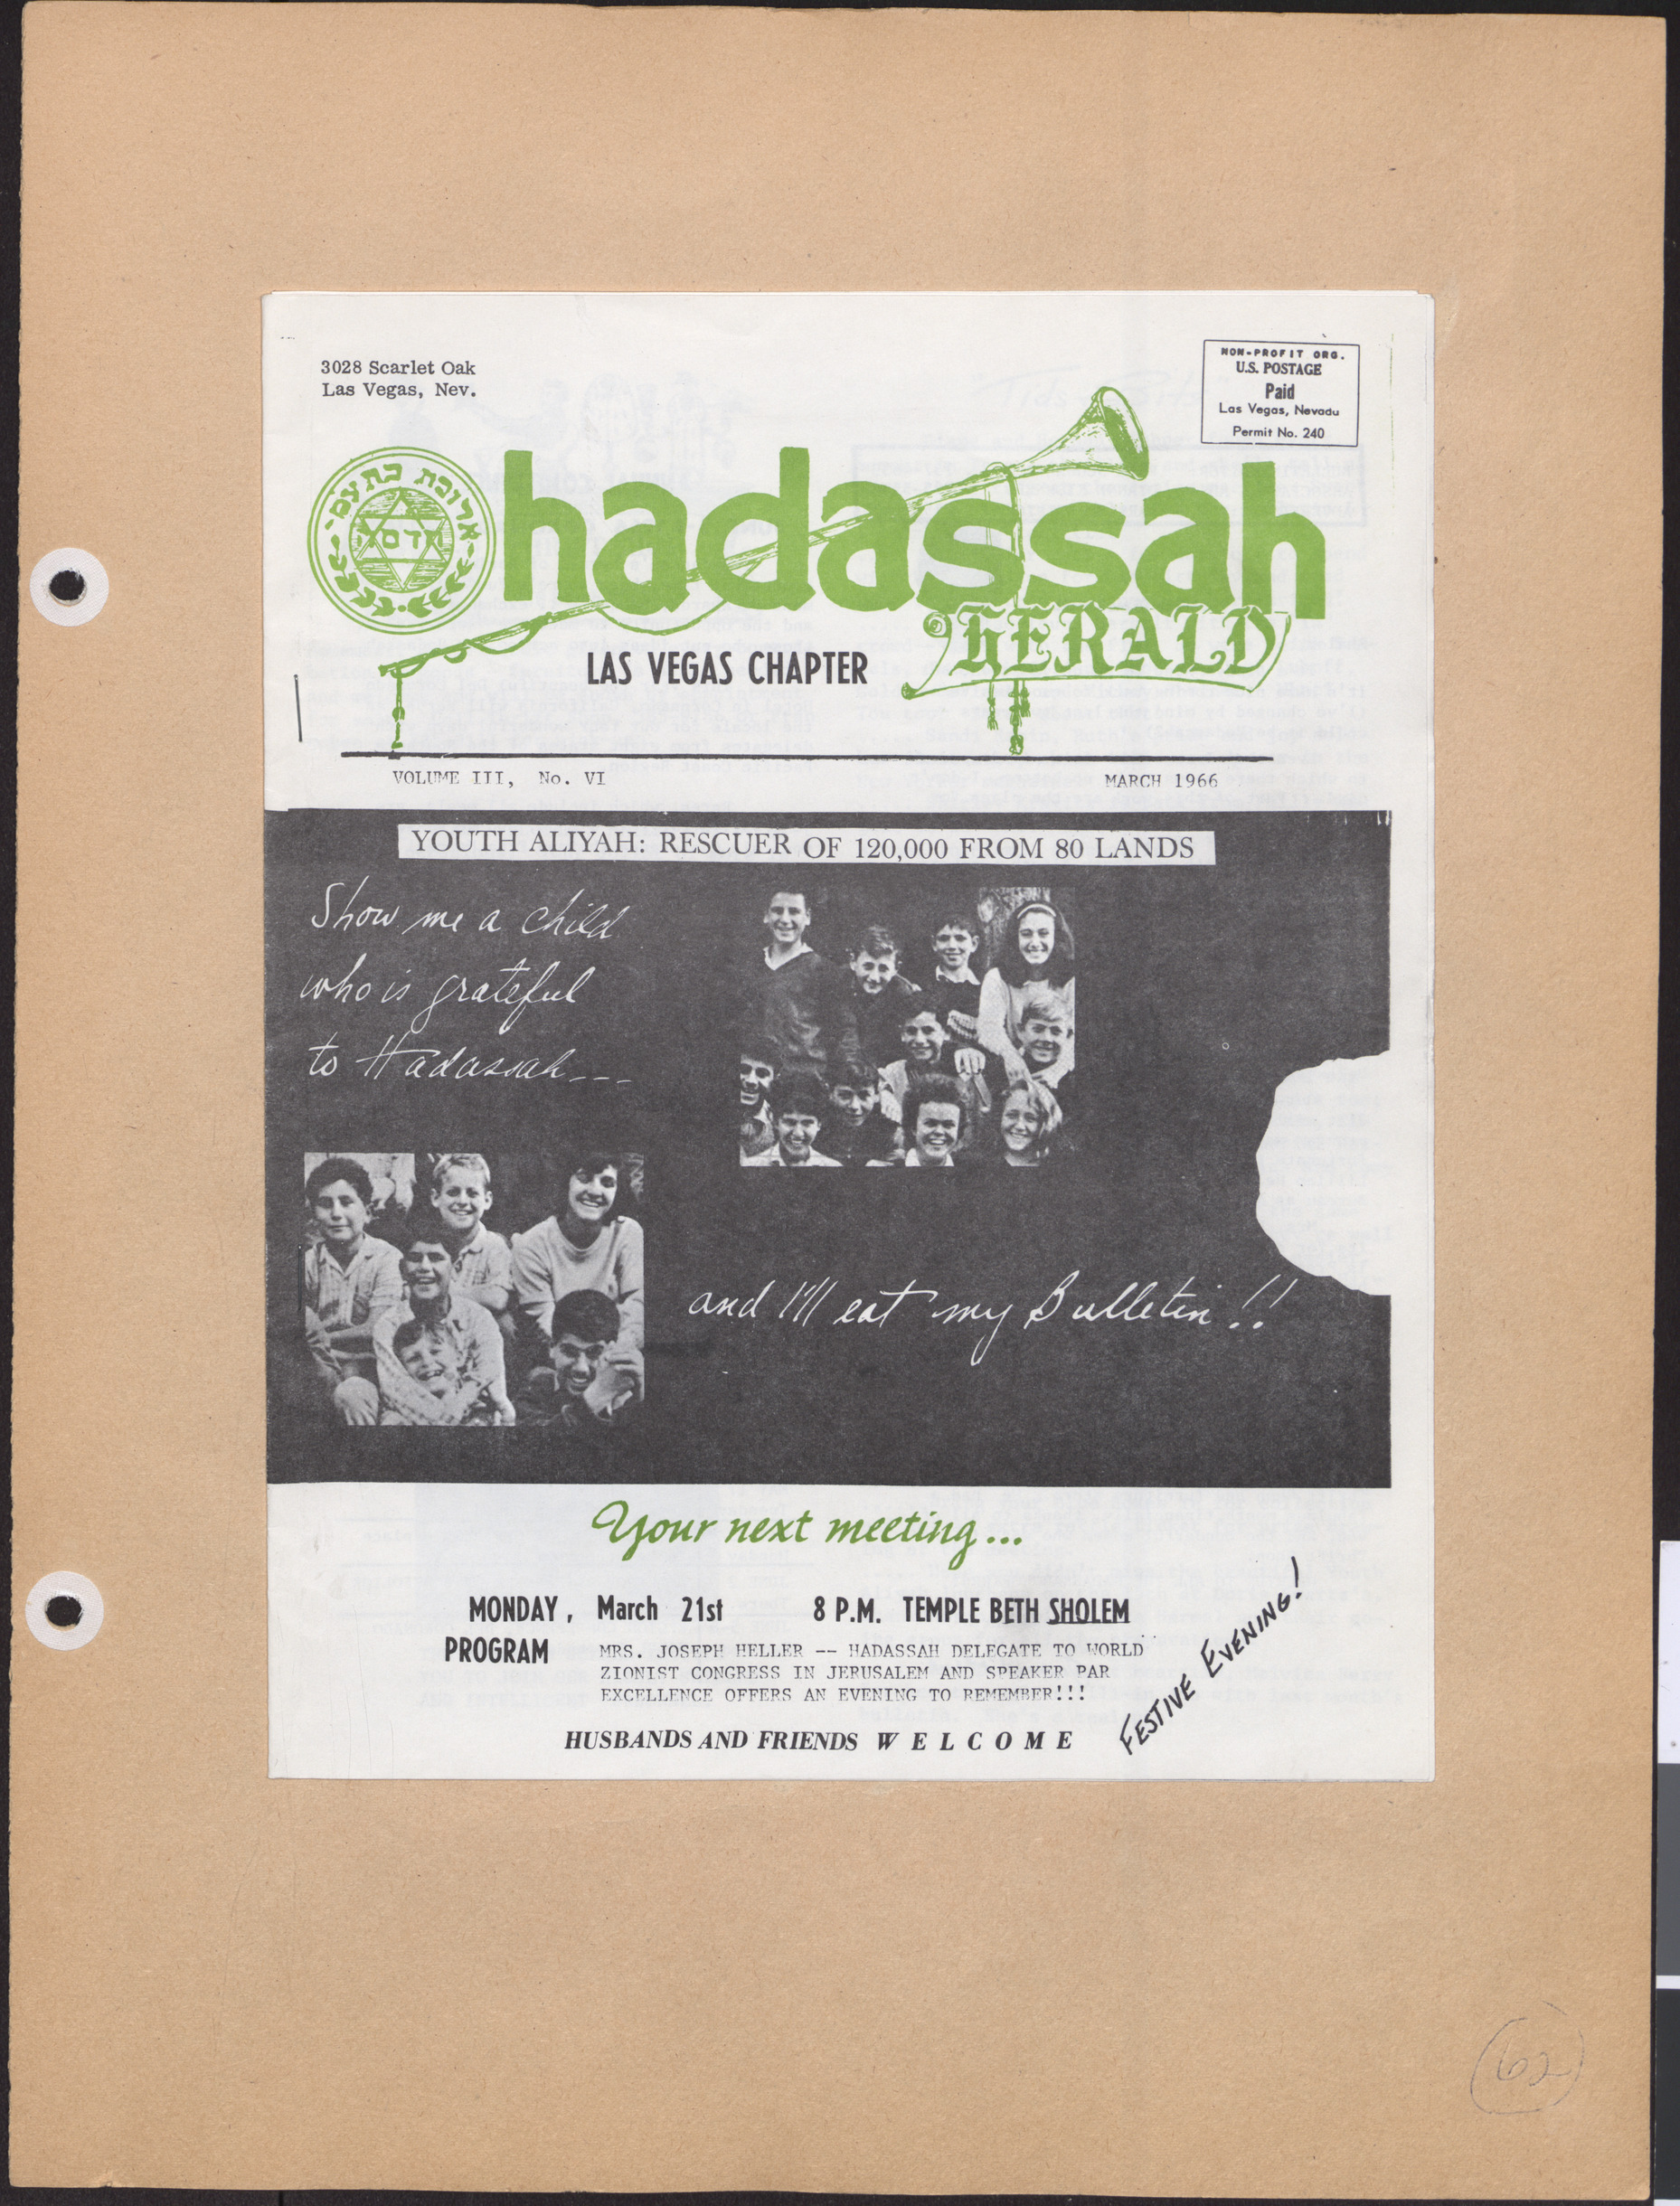 Hadassah Las Vegas Chapter newsletter, March 1966, cover